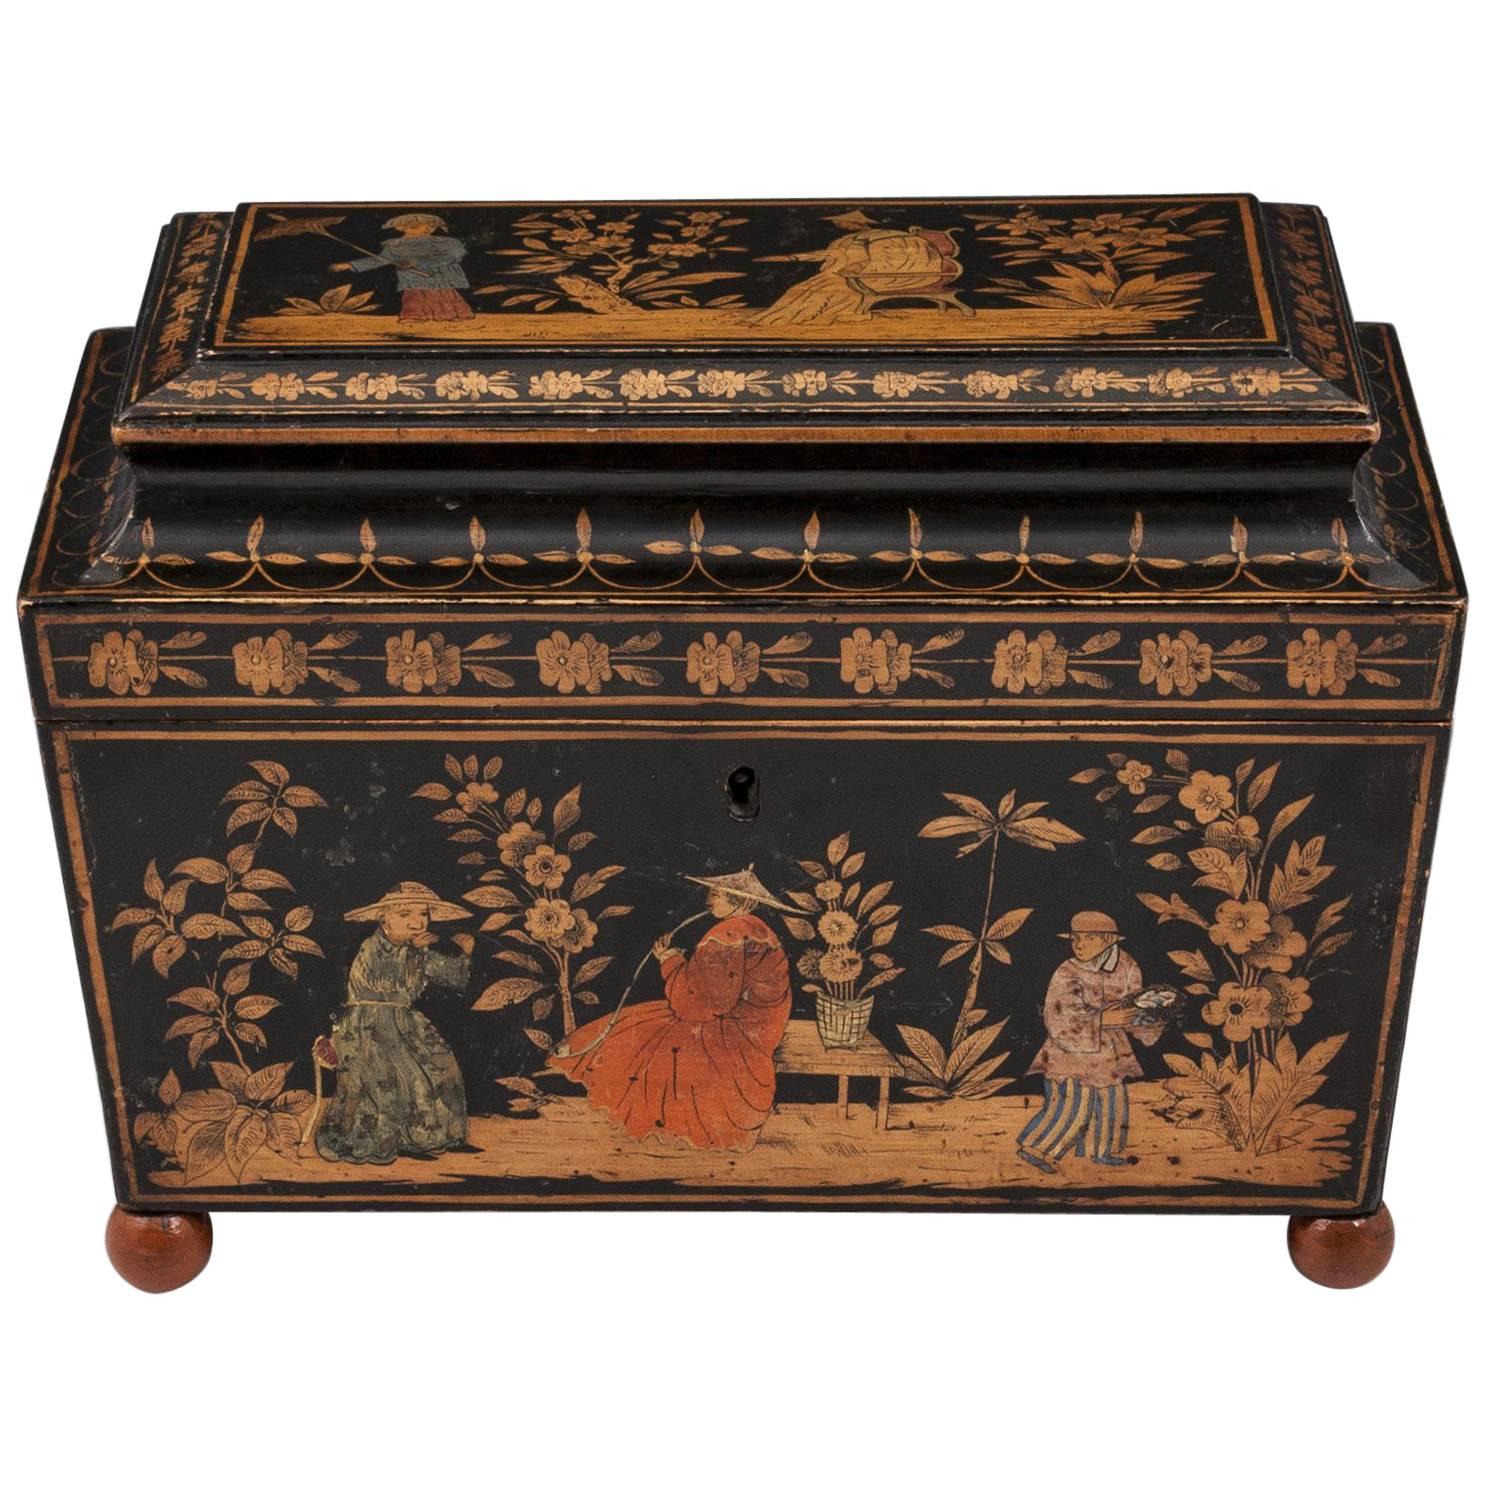 Superb Regency Painted Penwork and Chinoiserie Sarcophagus Shaped Tea Caddy